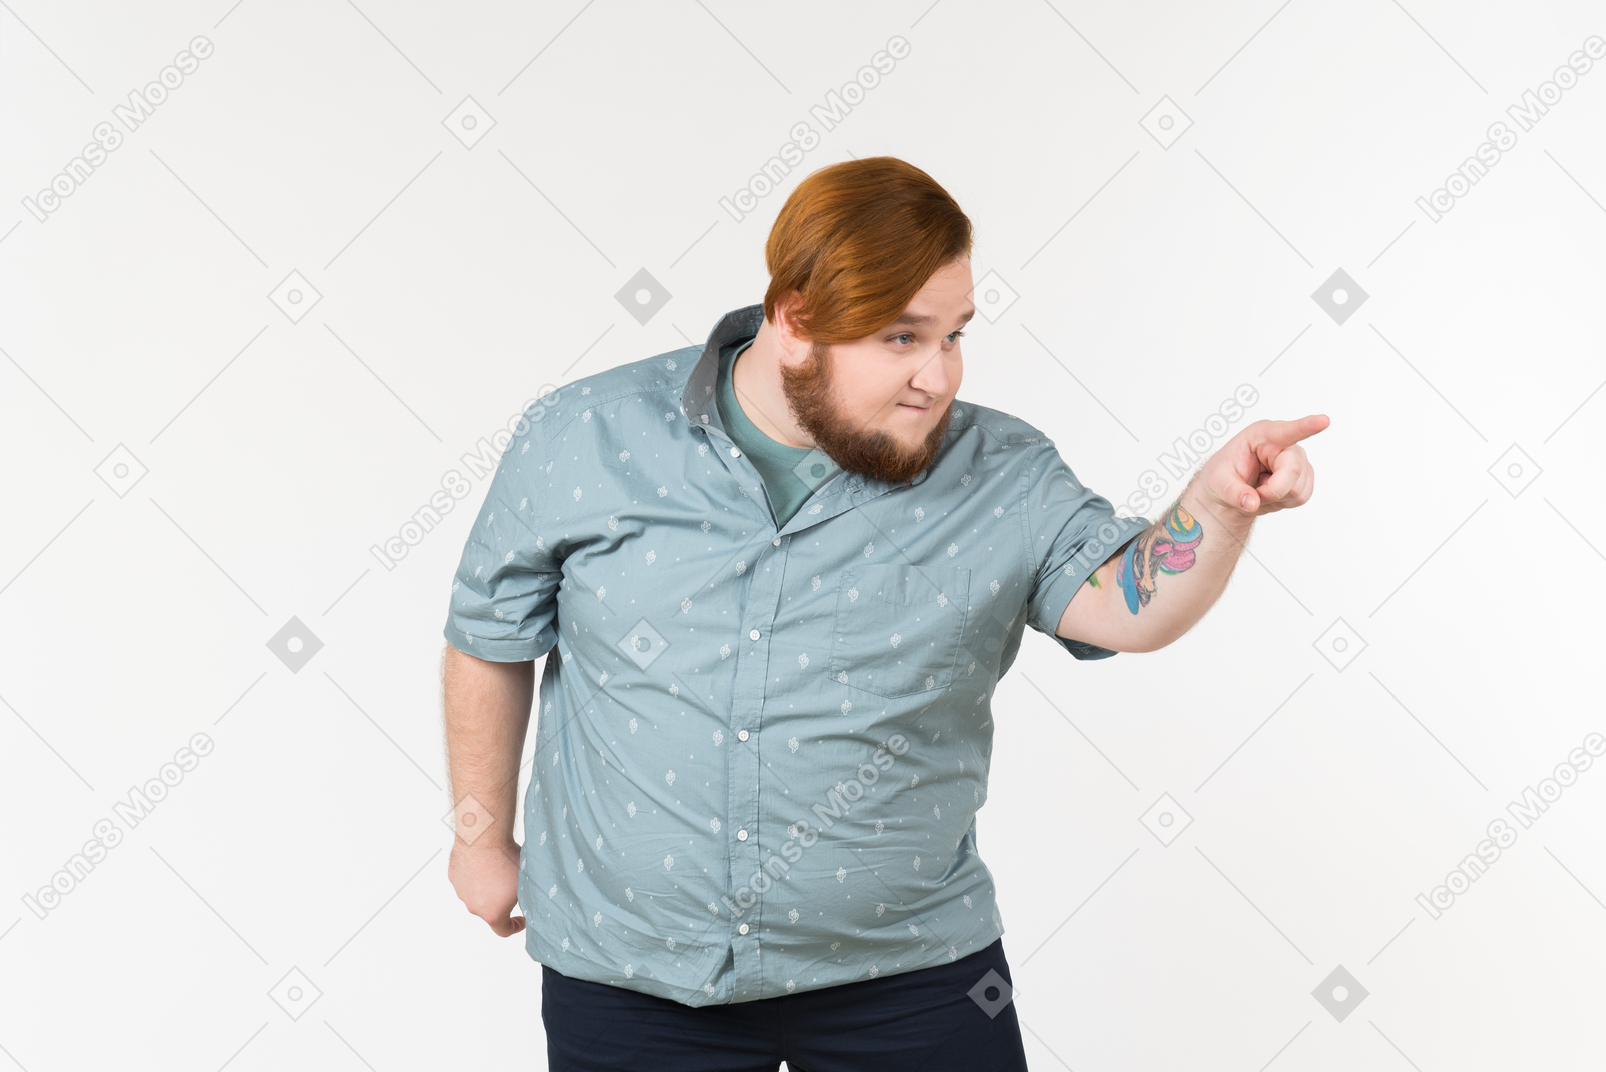 A fat man pointing at someone with a sly look